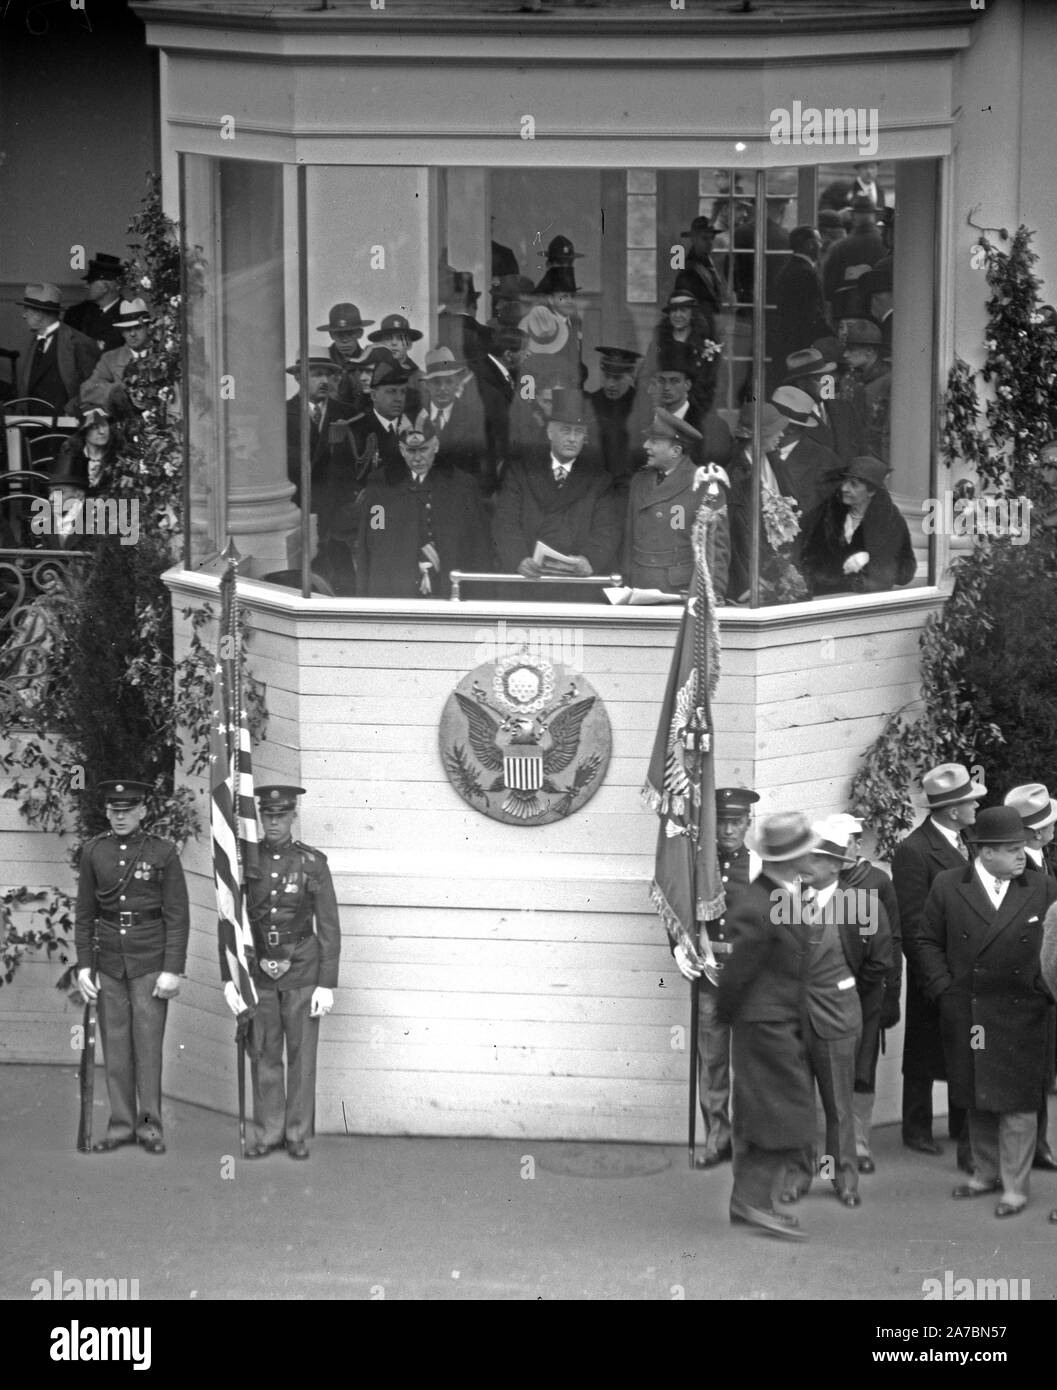 Franklin D. Roosevelt - Franklin D. Roosevelt inauguration. Parade viewing stand. Washington, D.C. March 4, 1933 Stock Photo